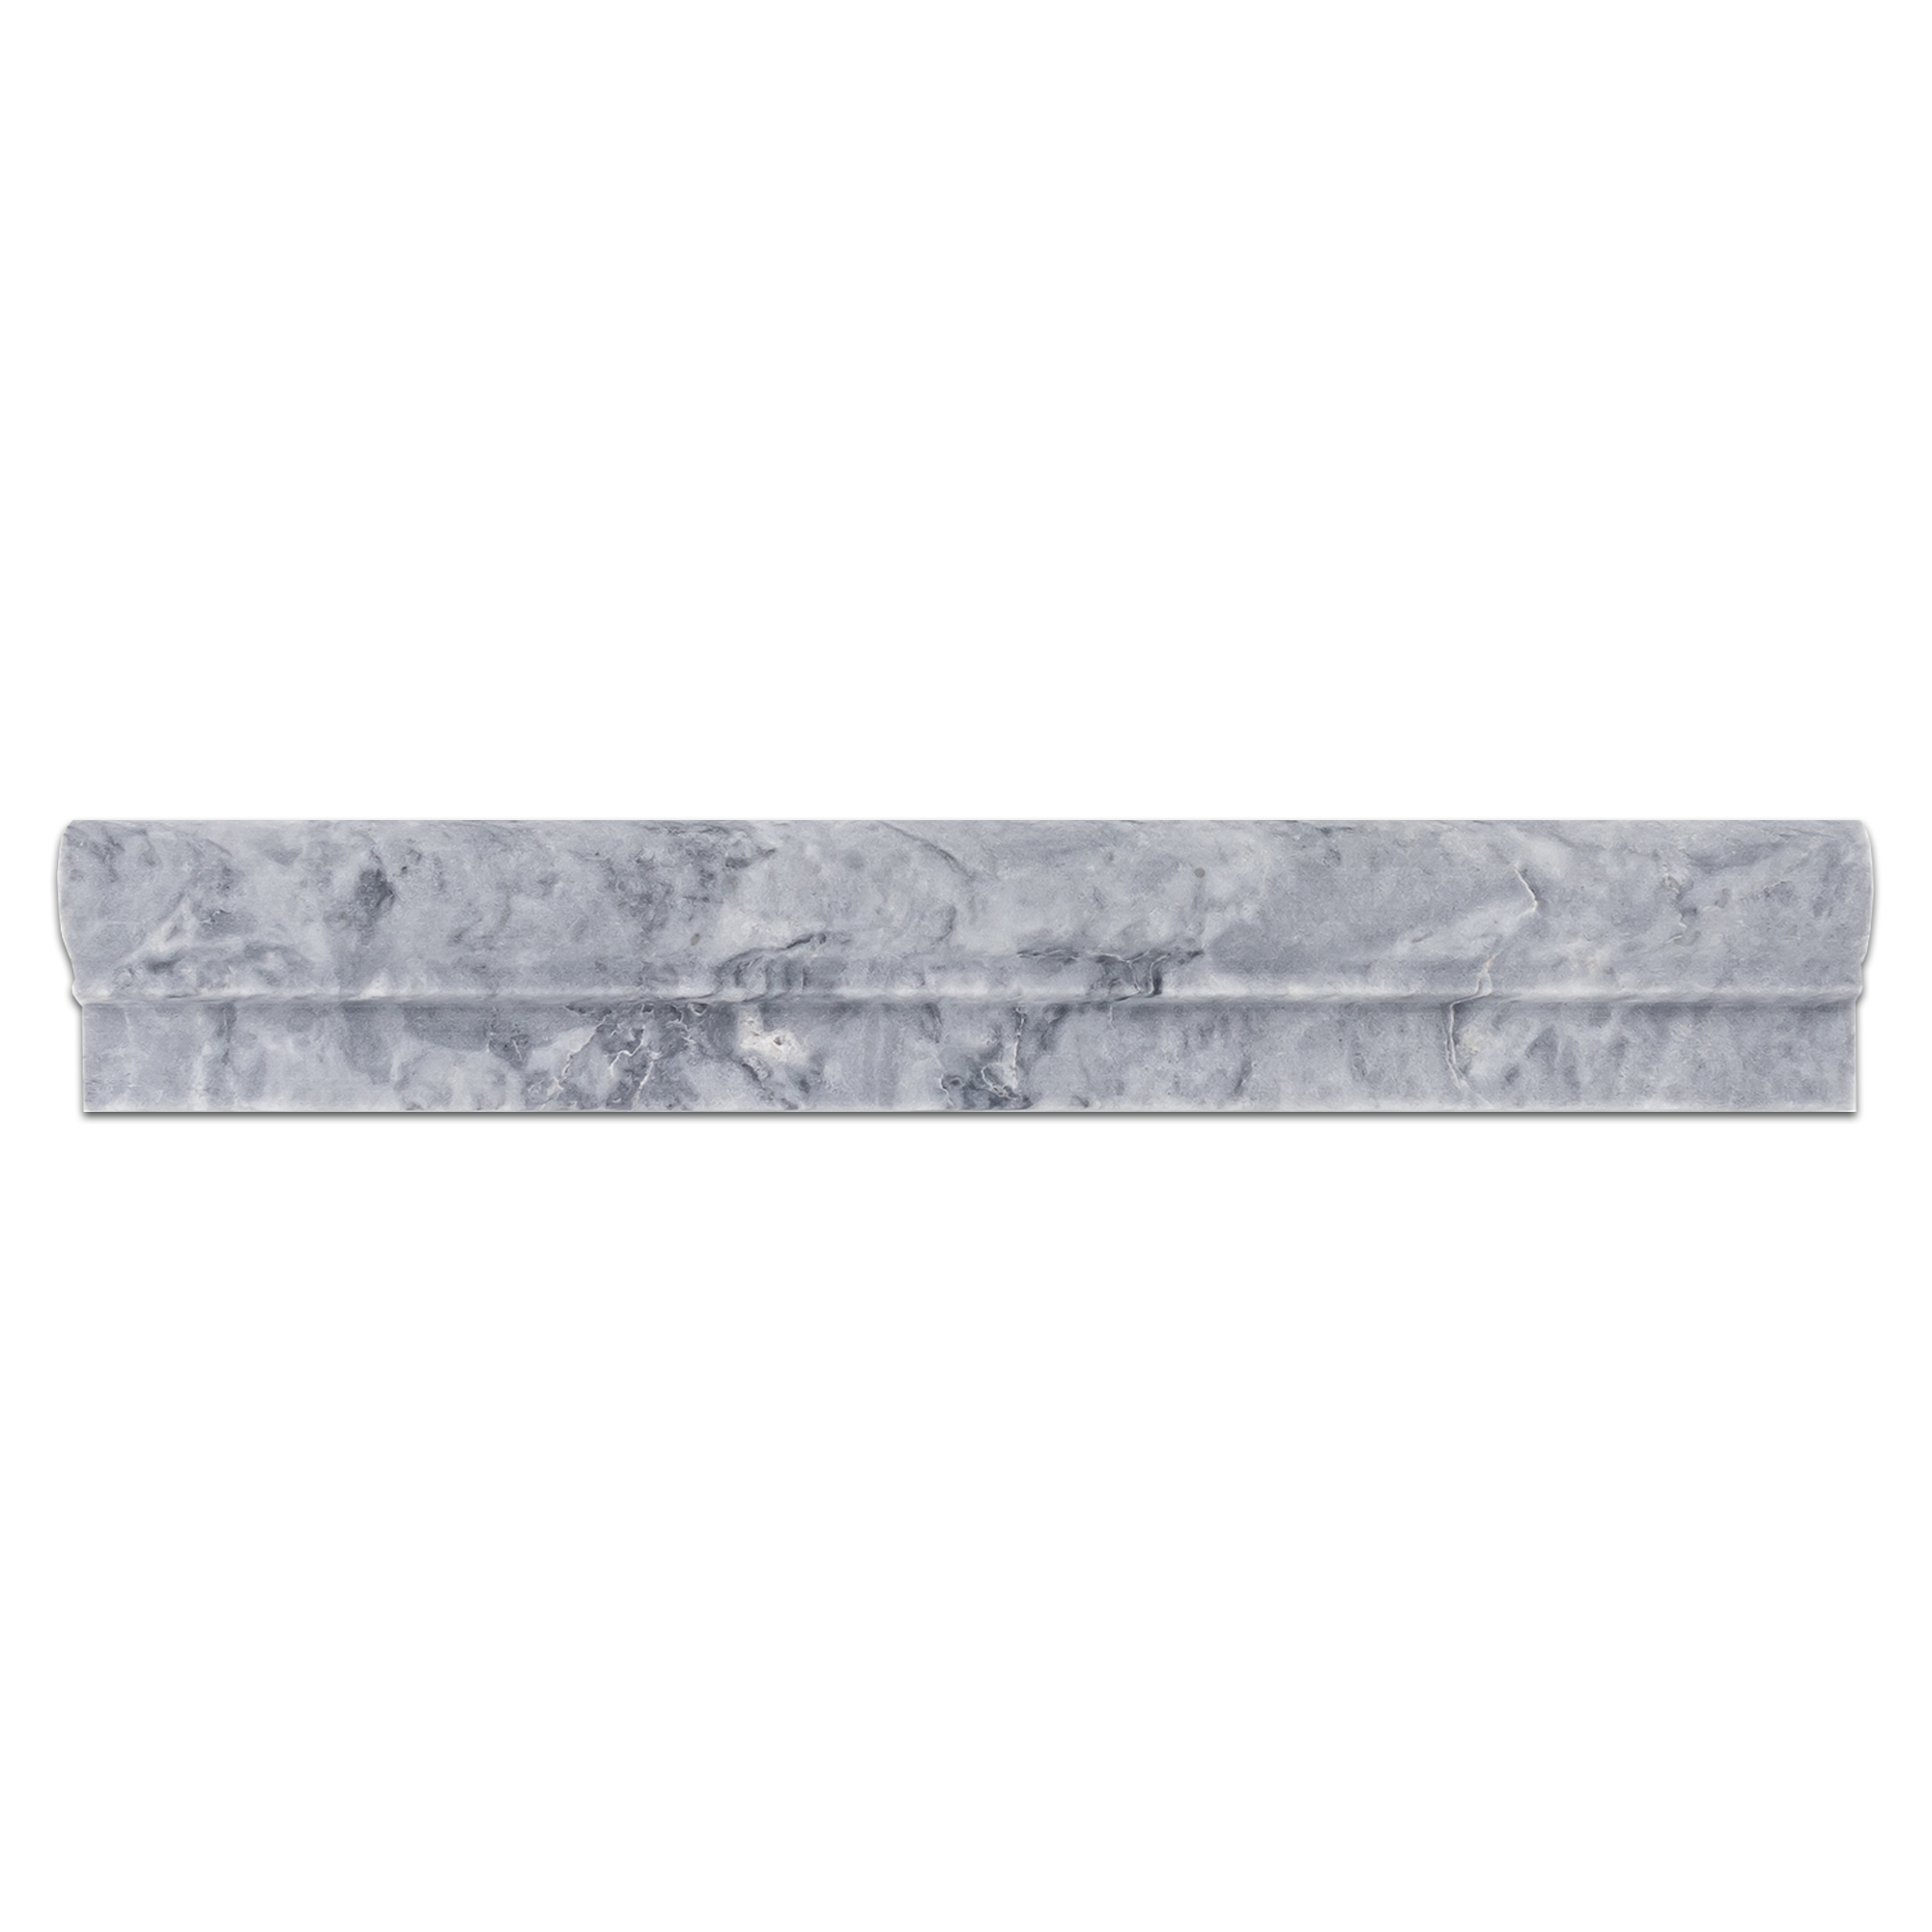 Elon Pacific Gray Marble Ogee 2x12 Honed Tile - Surface Group International